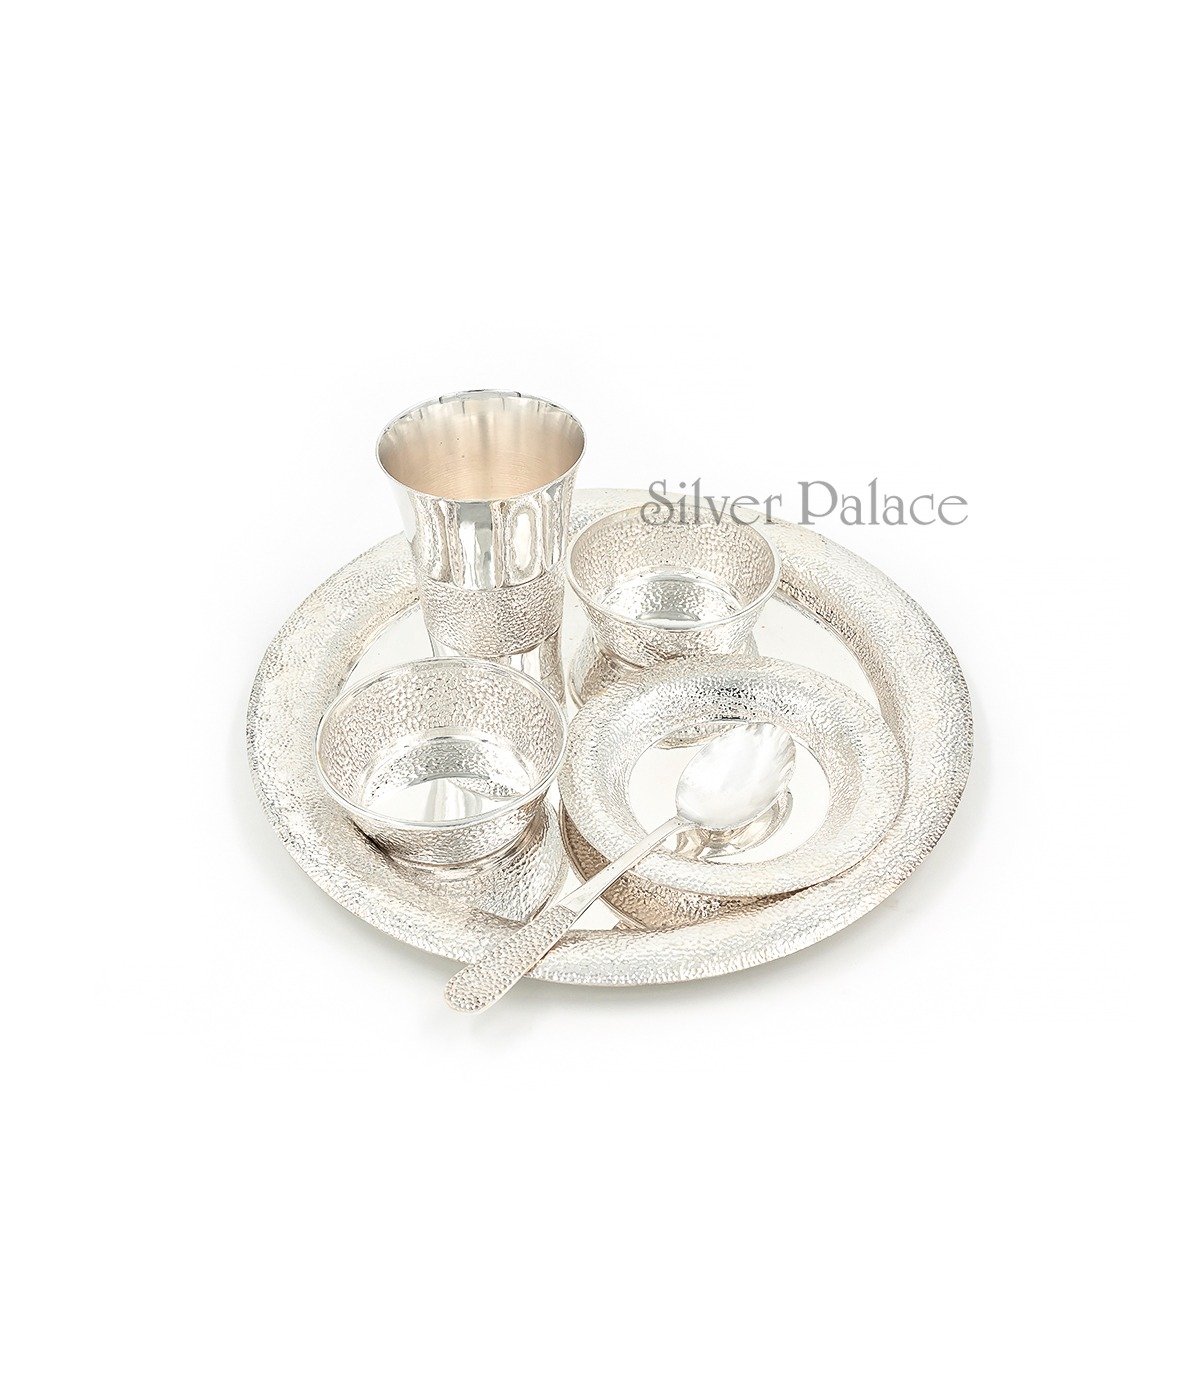 92.5 PURE SILVER MEAL PLATE SET 